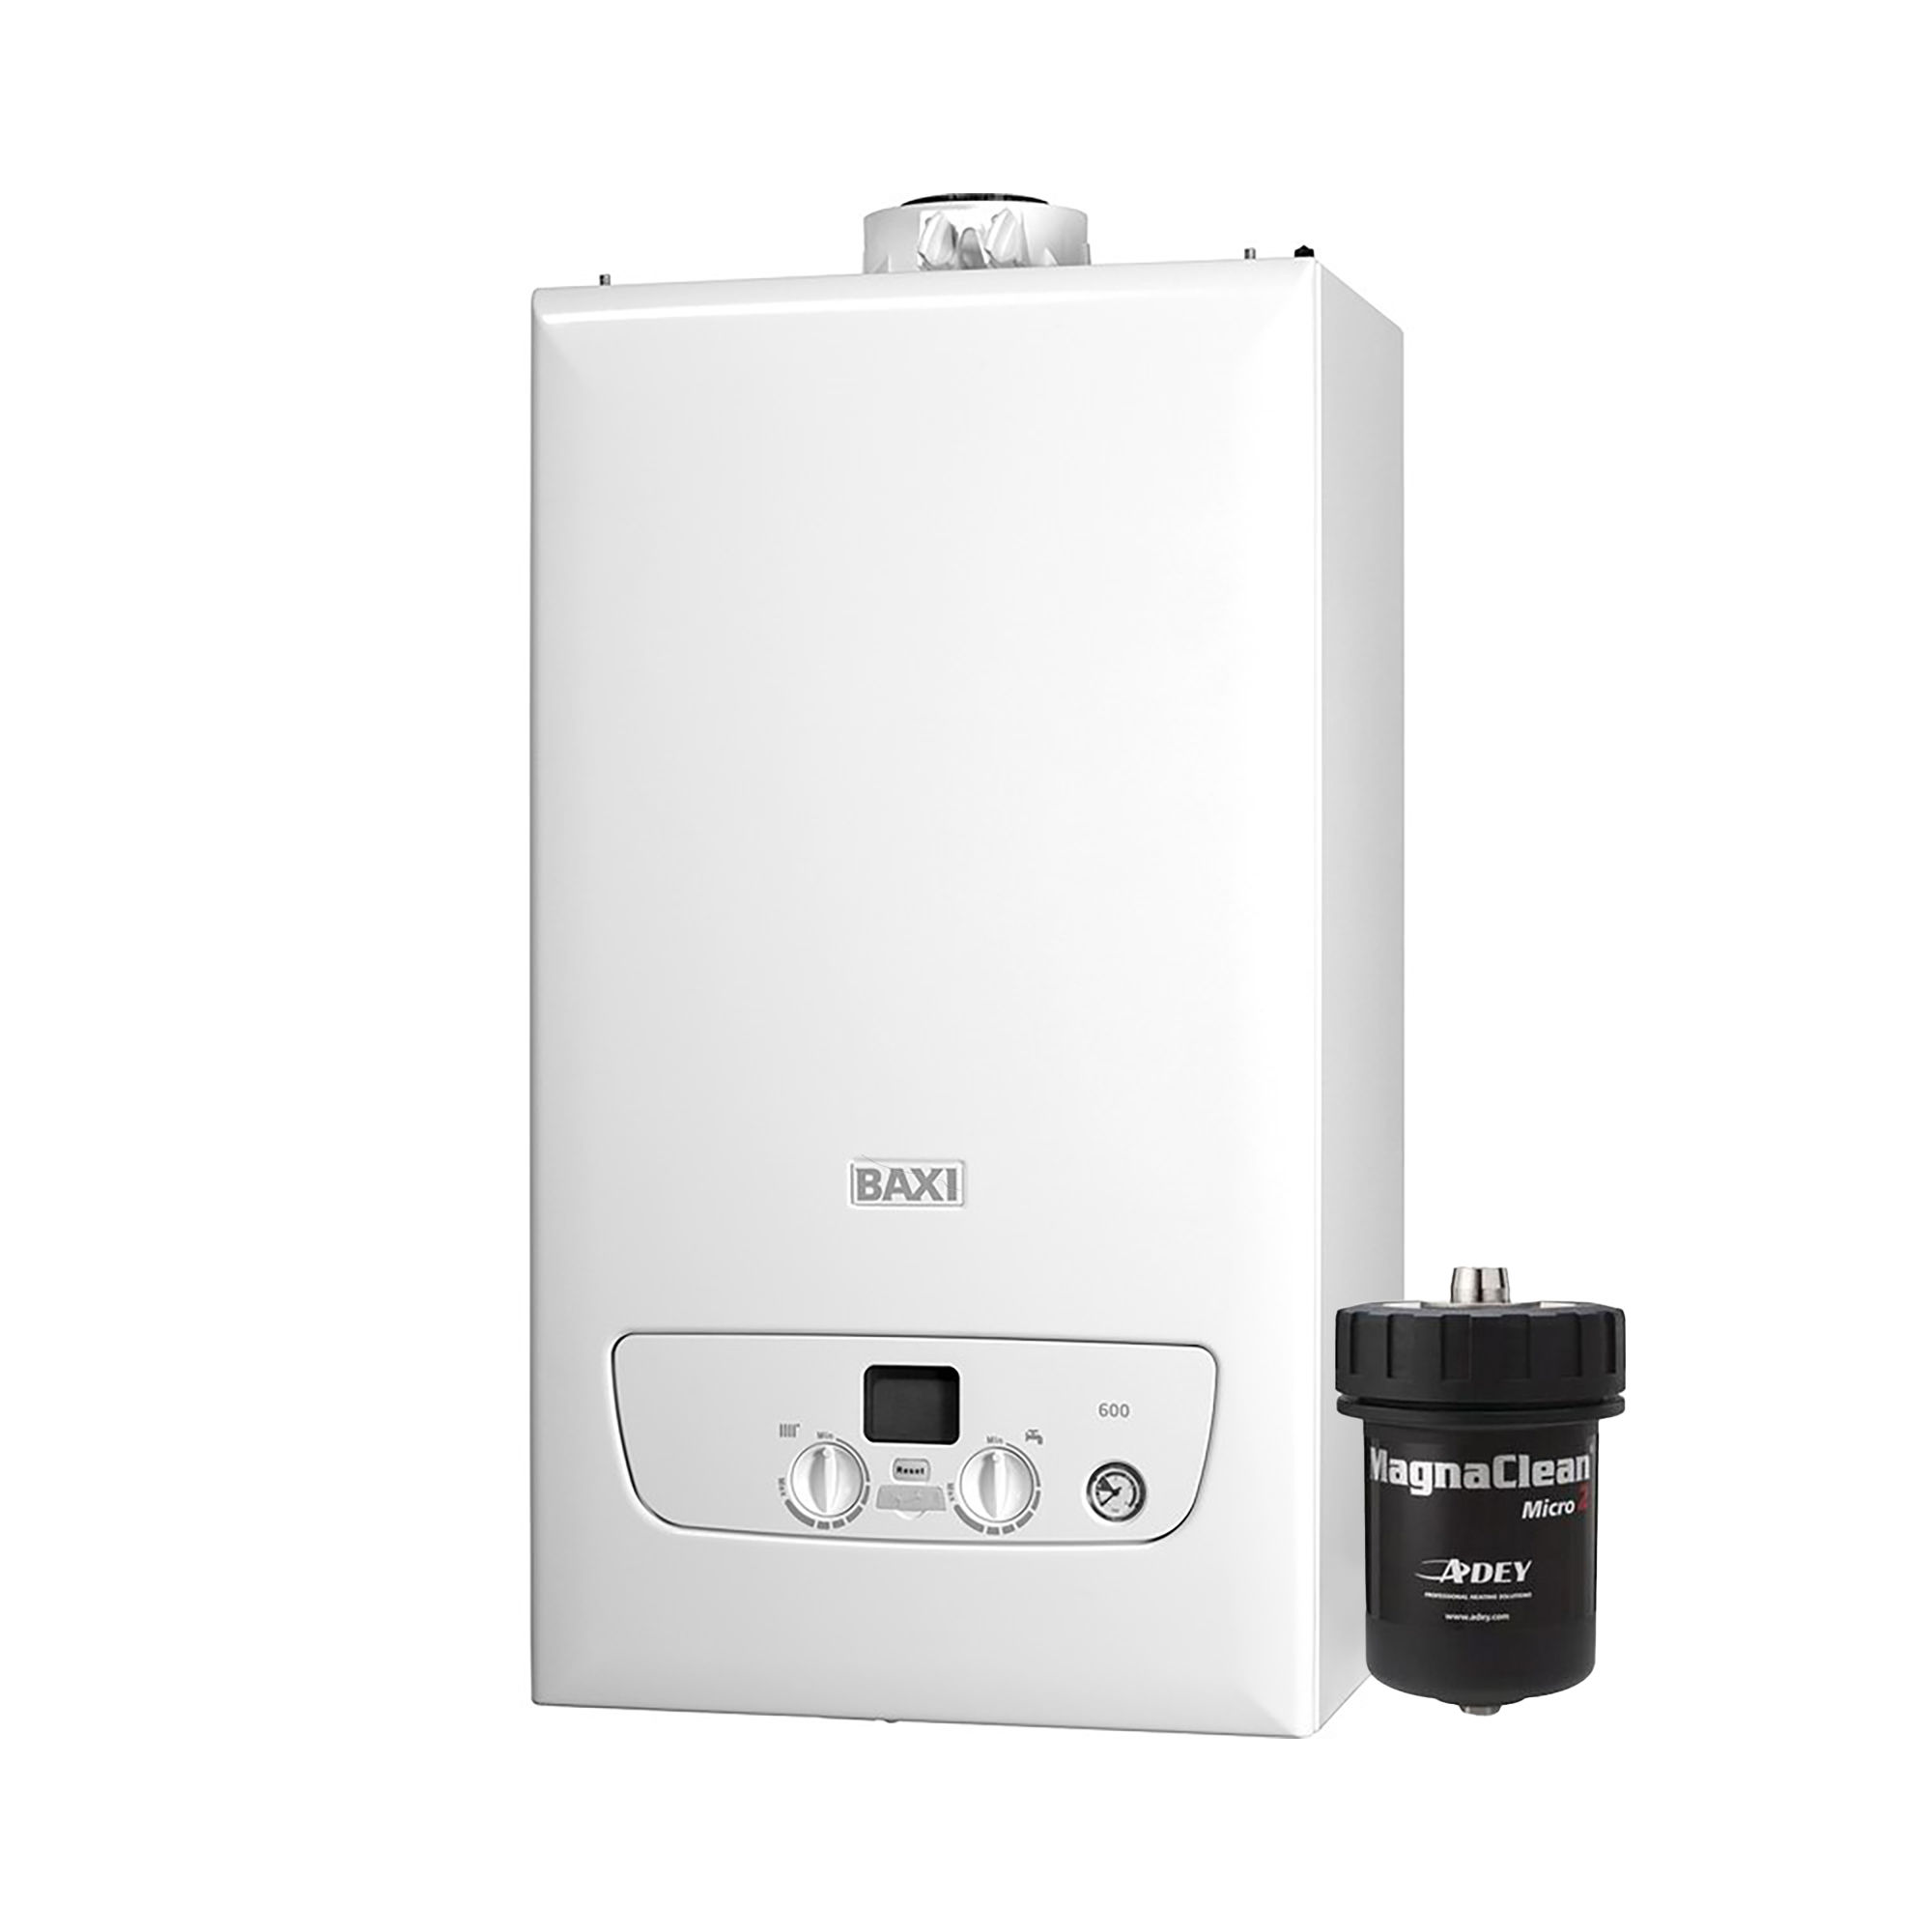 Baxi 830 Natural Gas Combi Boiler Complete with Magnaclean Micro 2 Filter (10 Year Warranty) 7731874